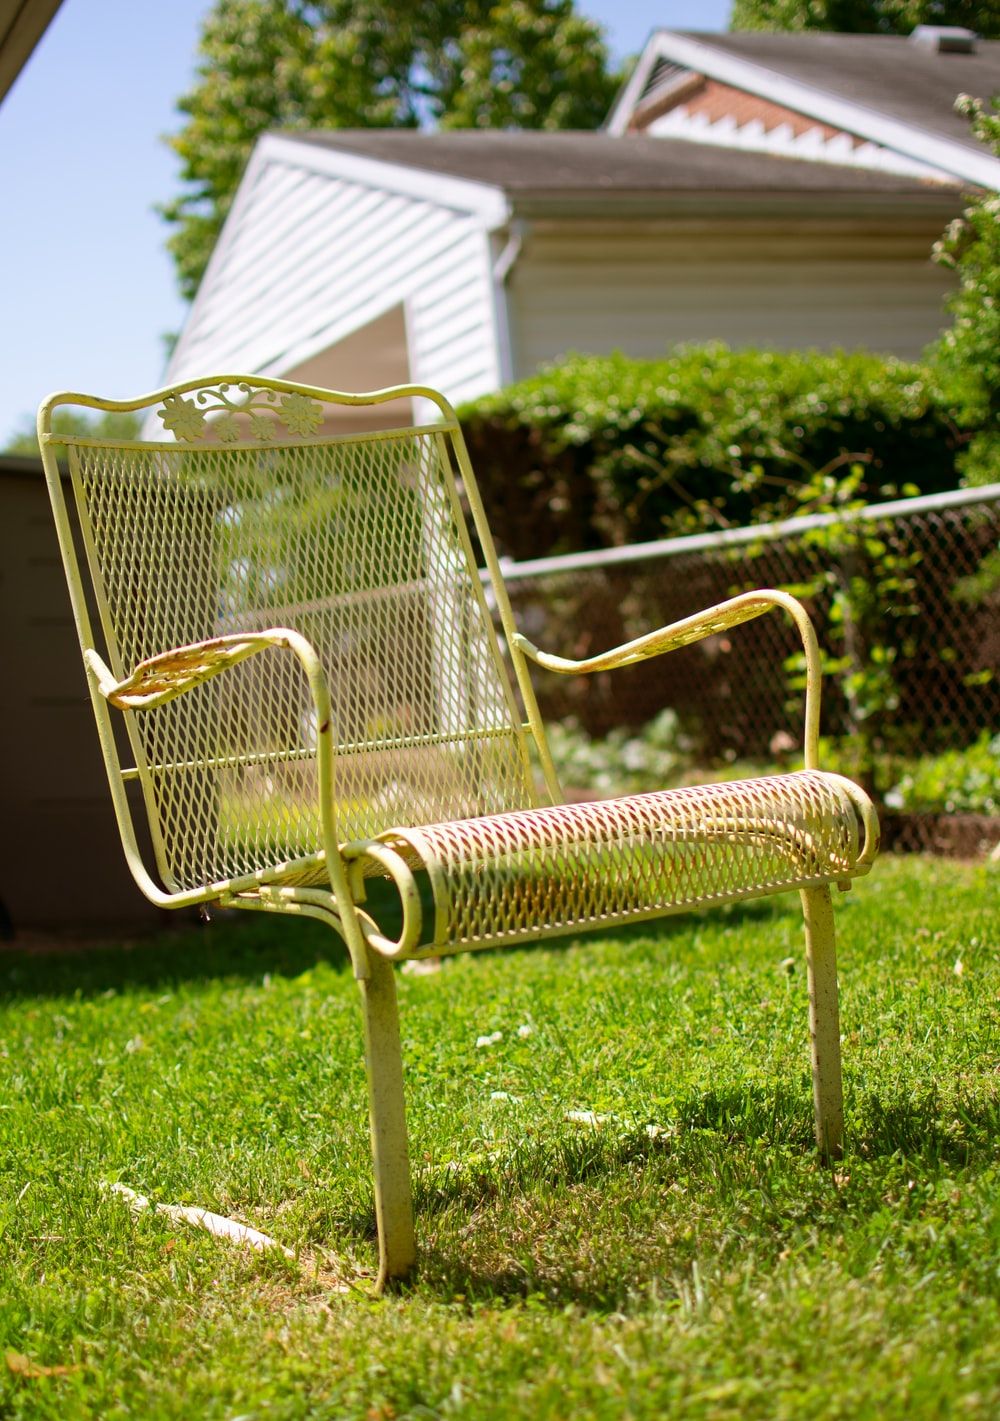 Lawn Chair Picture. Download Free Image